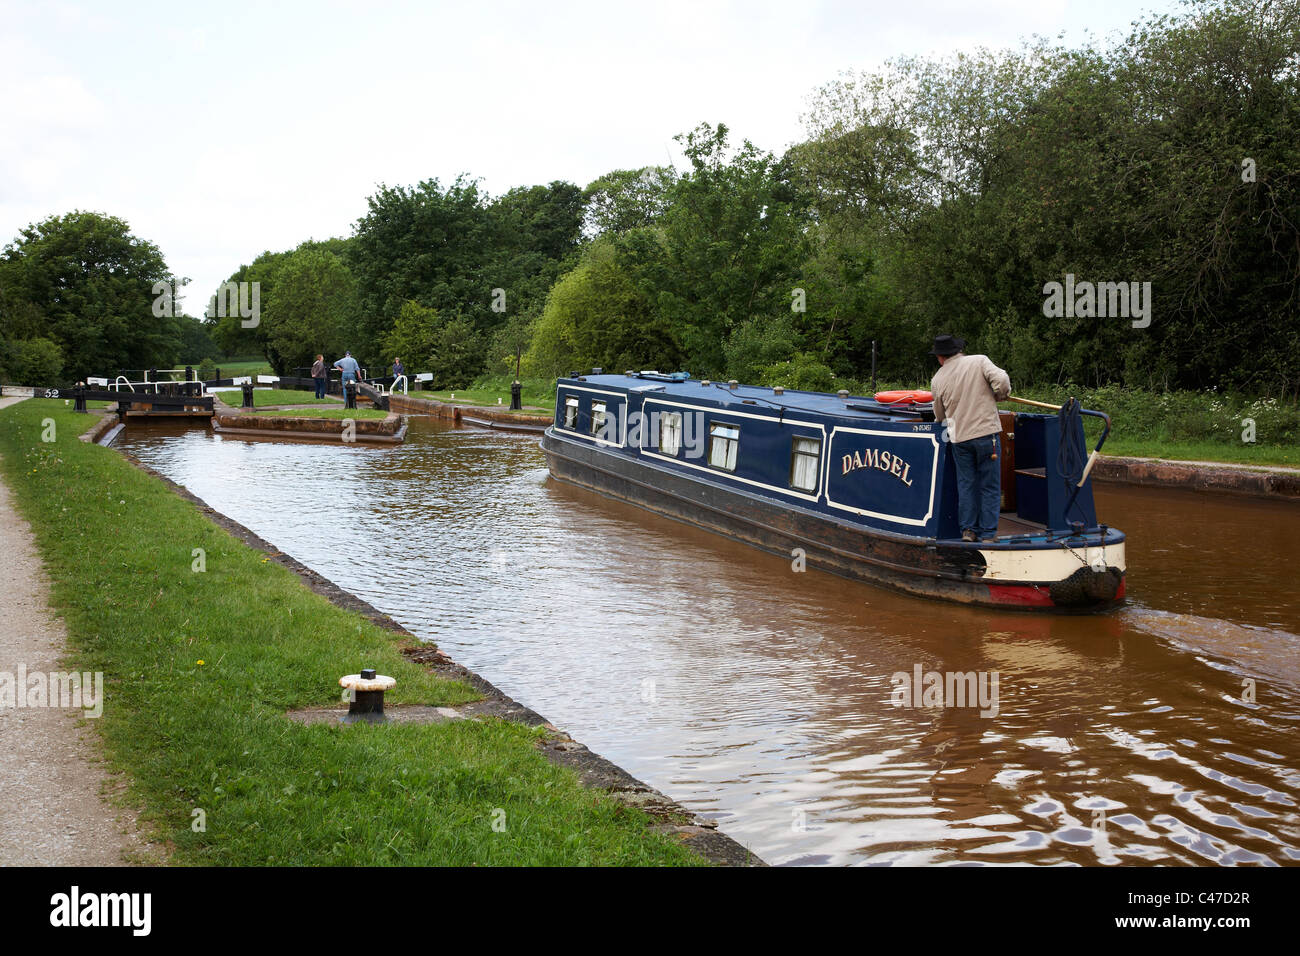 Narrow boat at Lawton locks on the Trent and Mersey Canal in Cheshire UK Stock Photo